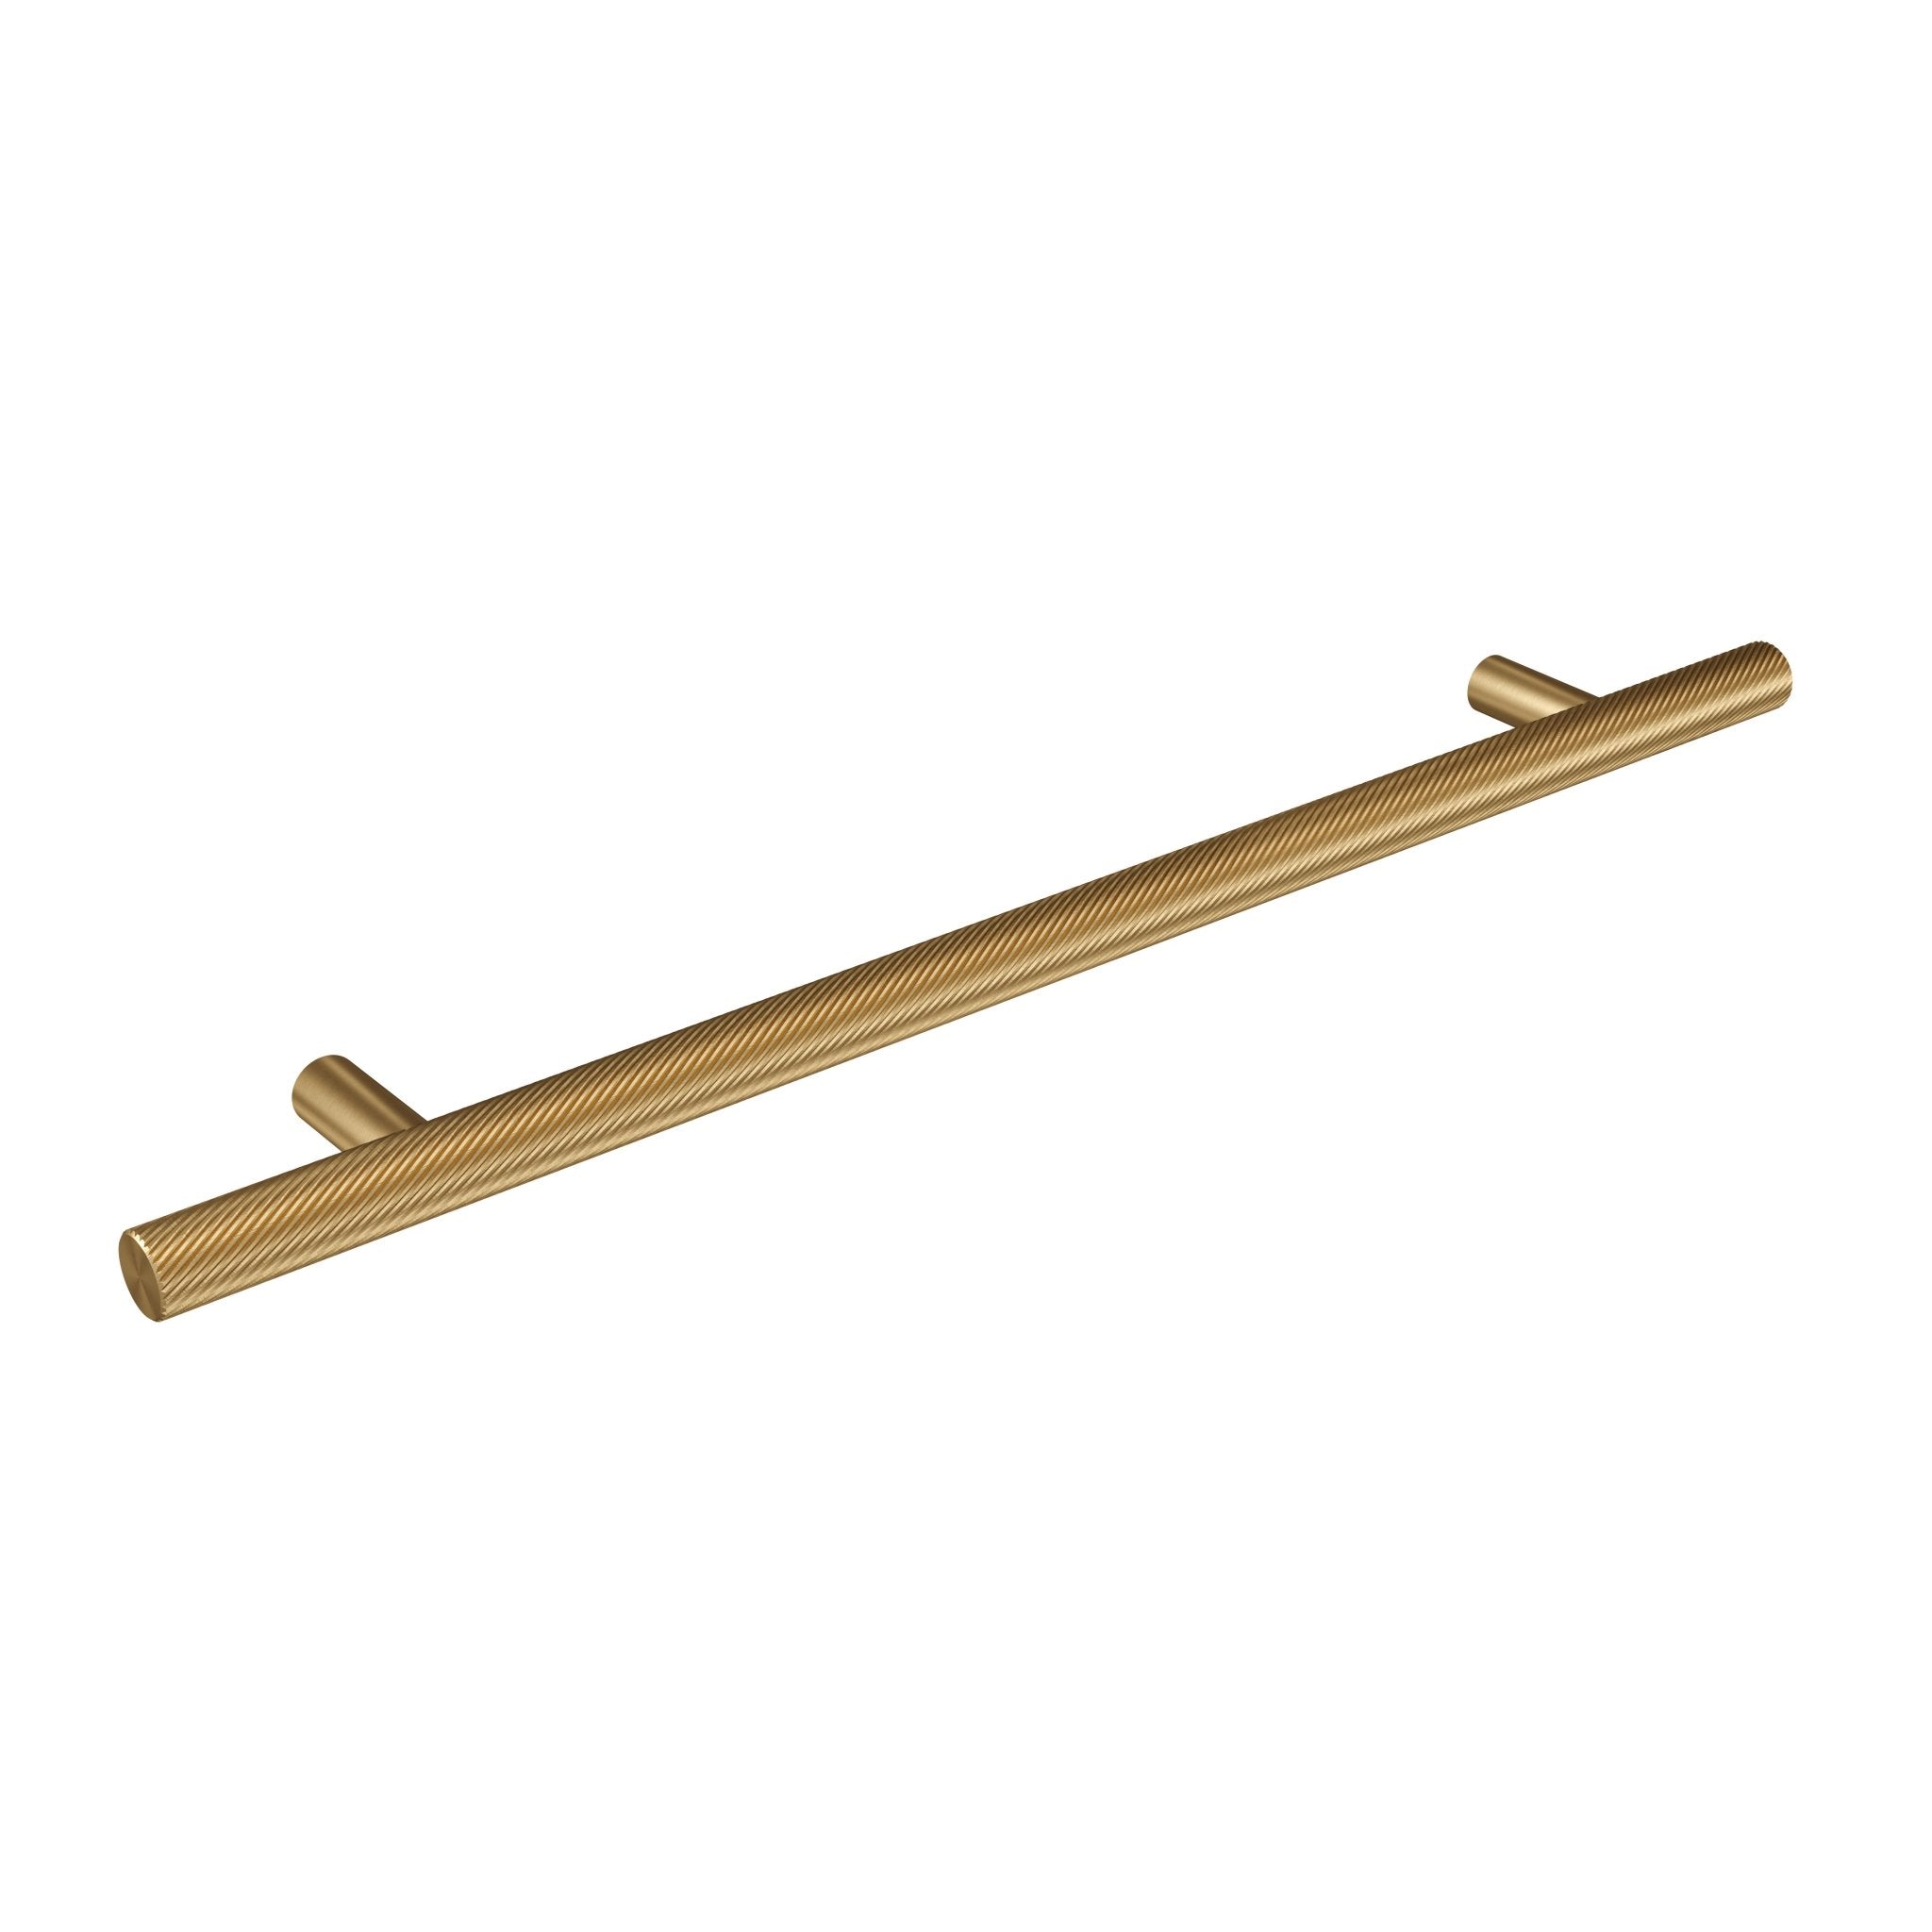 Spiral 12mm Pull Handle-Brushed Brass-300mm-The Hairpin Leg Co.